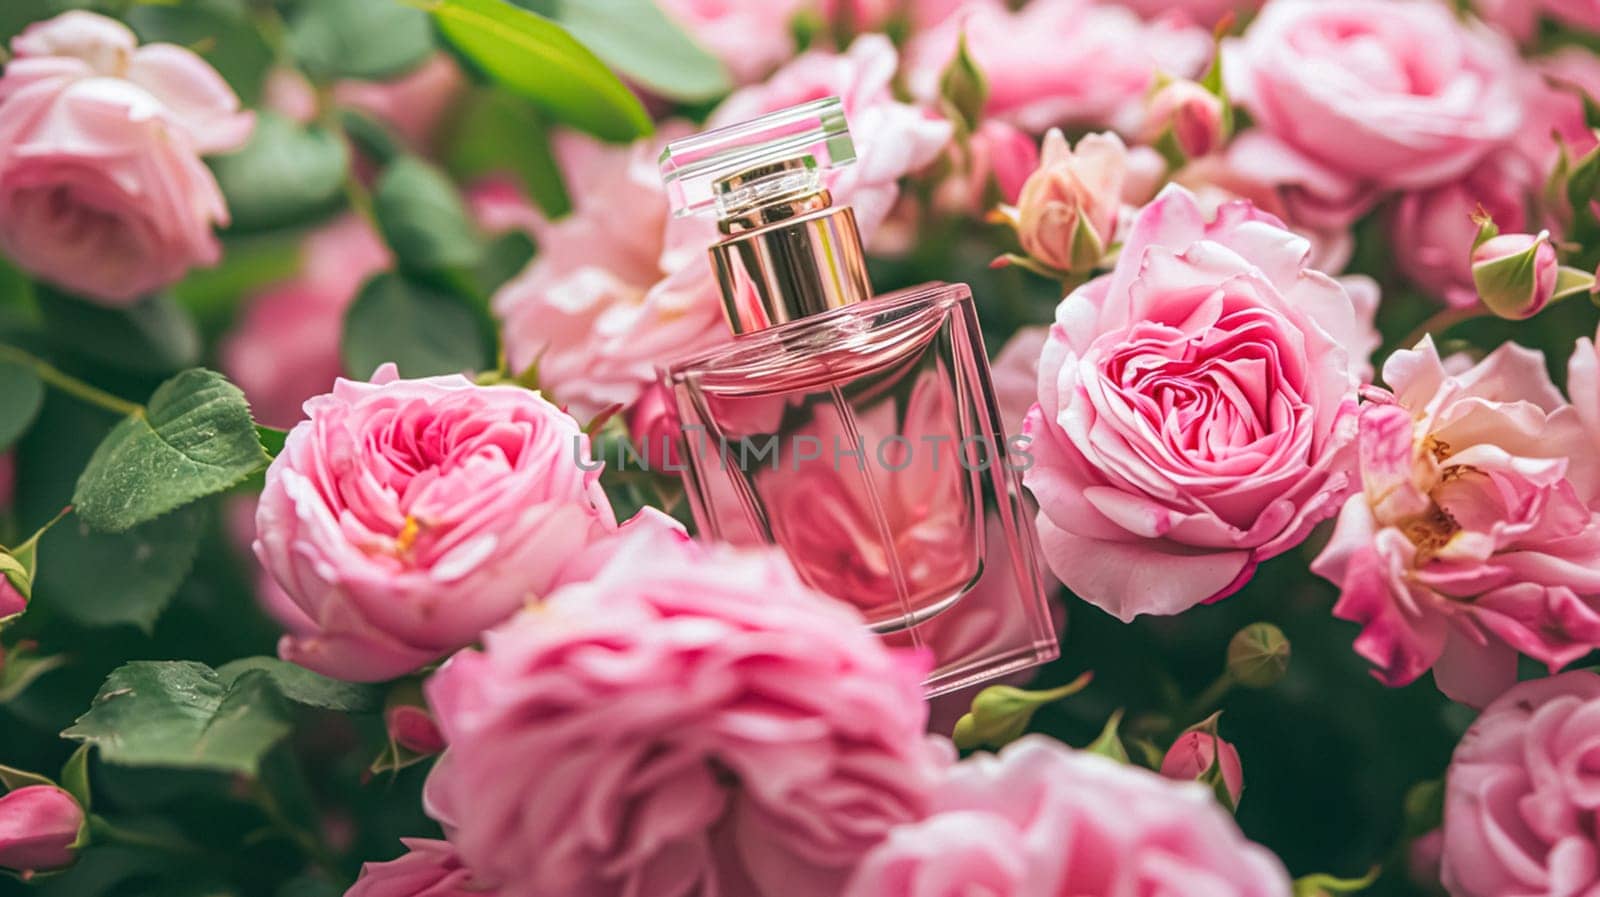 Perfume bottle with beautiful flowers. Beauty concept. Flat lay, top view by Olayola